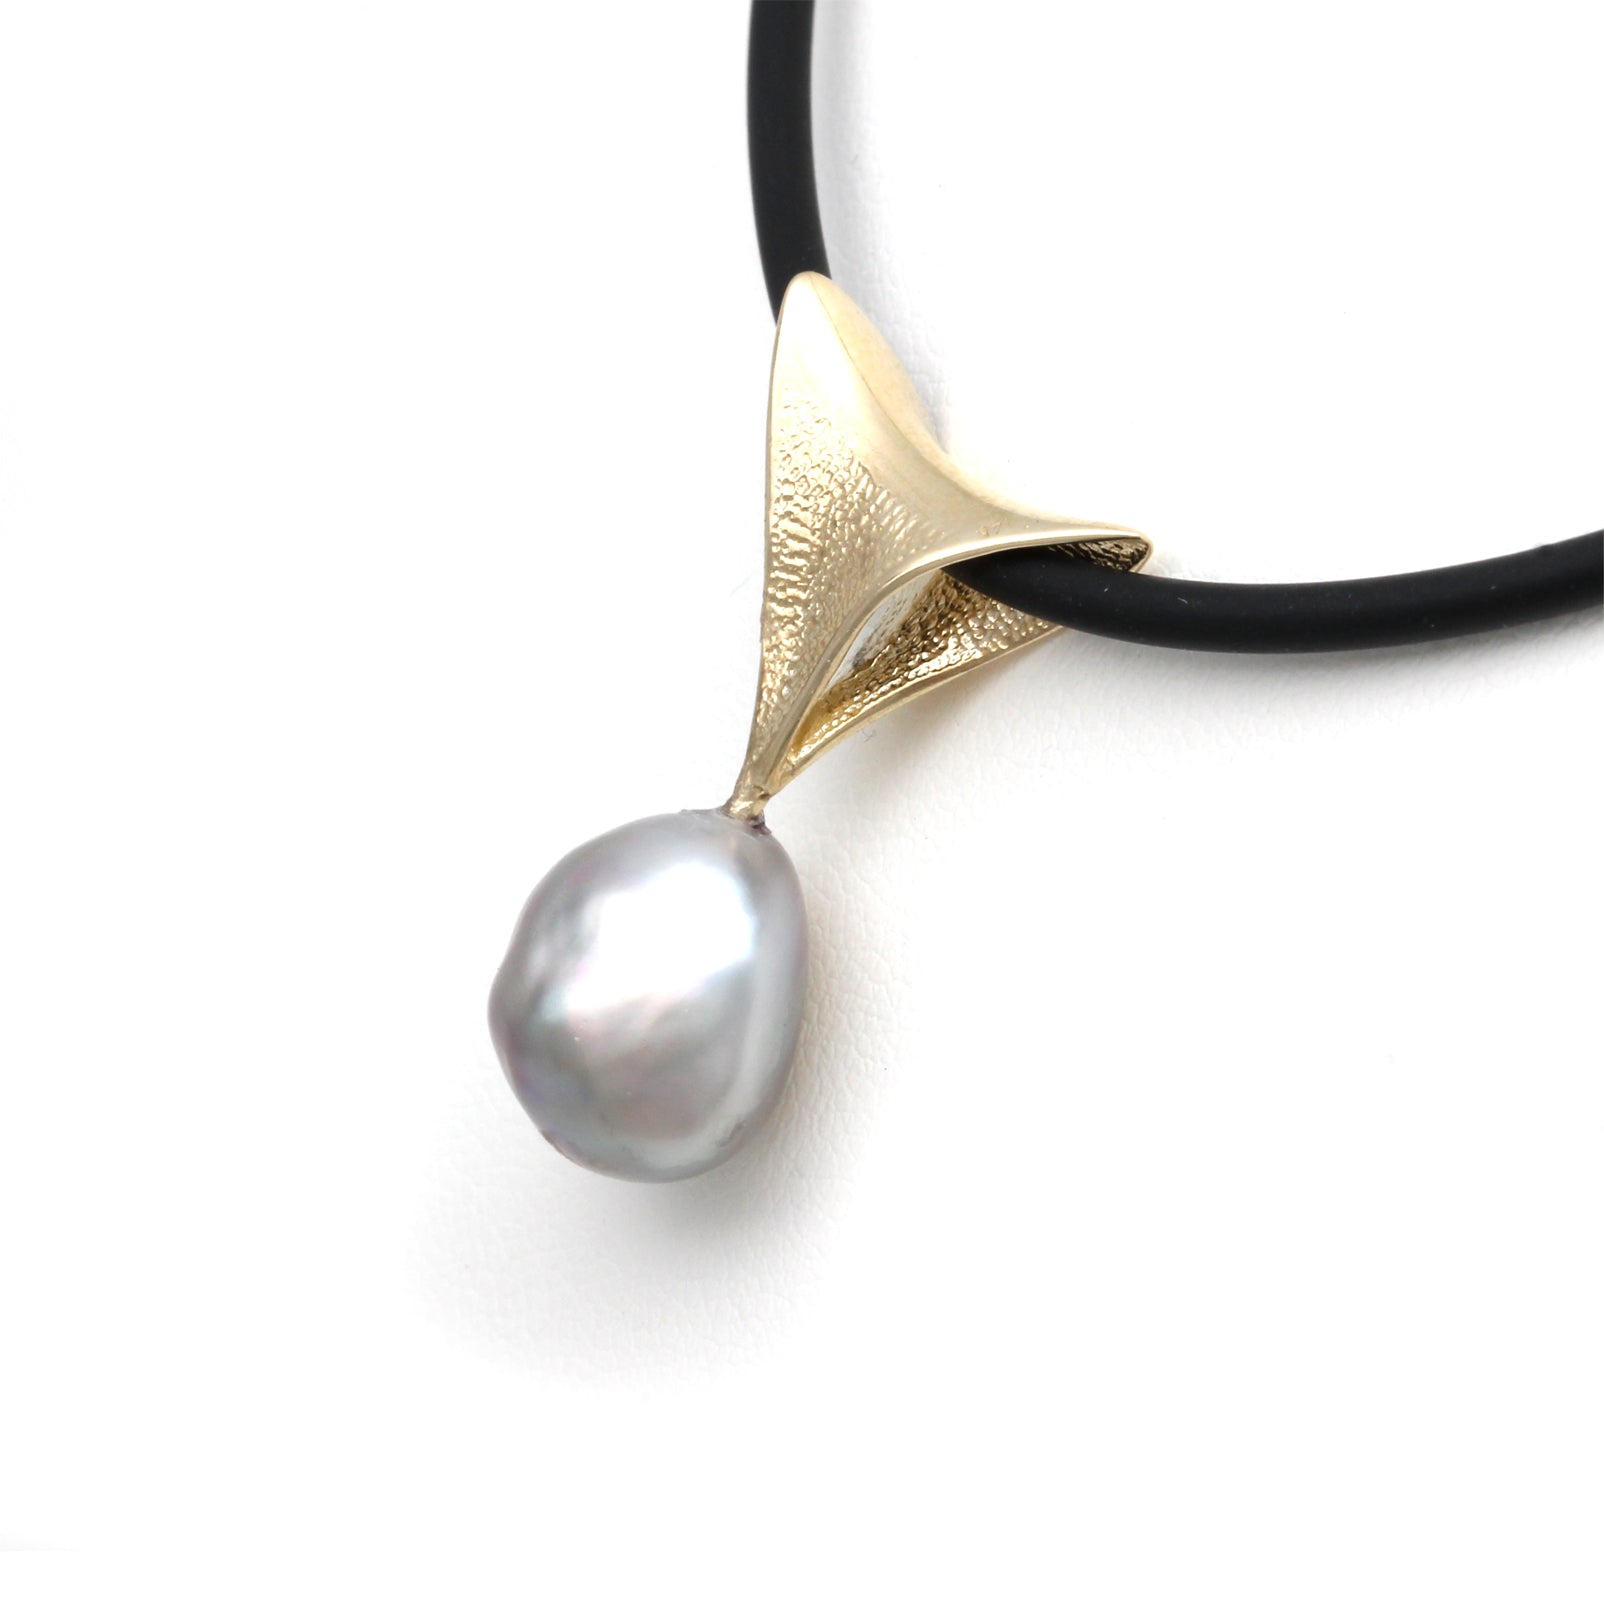 Huge and Iridescent Cortez Pearl on "Ventus" 14K Yellow Gold Pendant